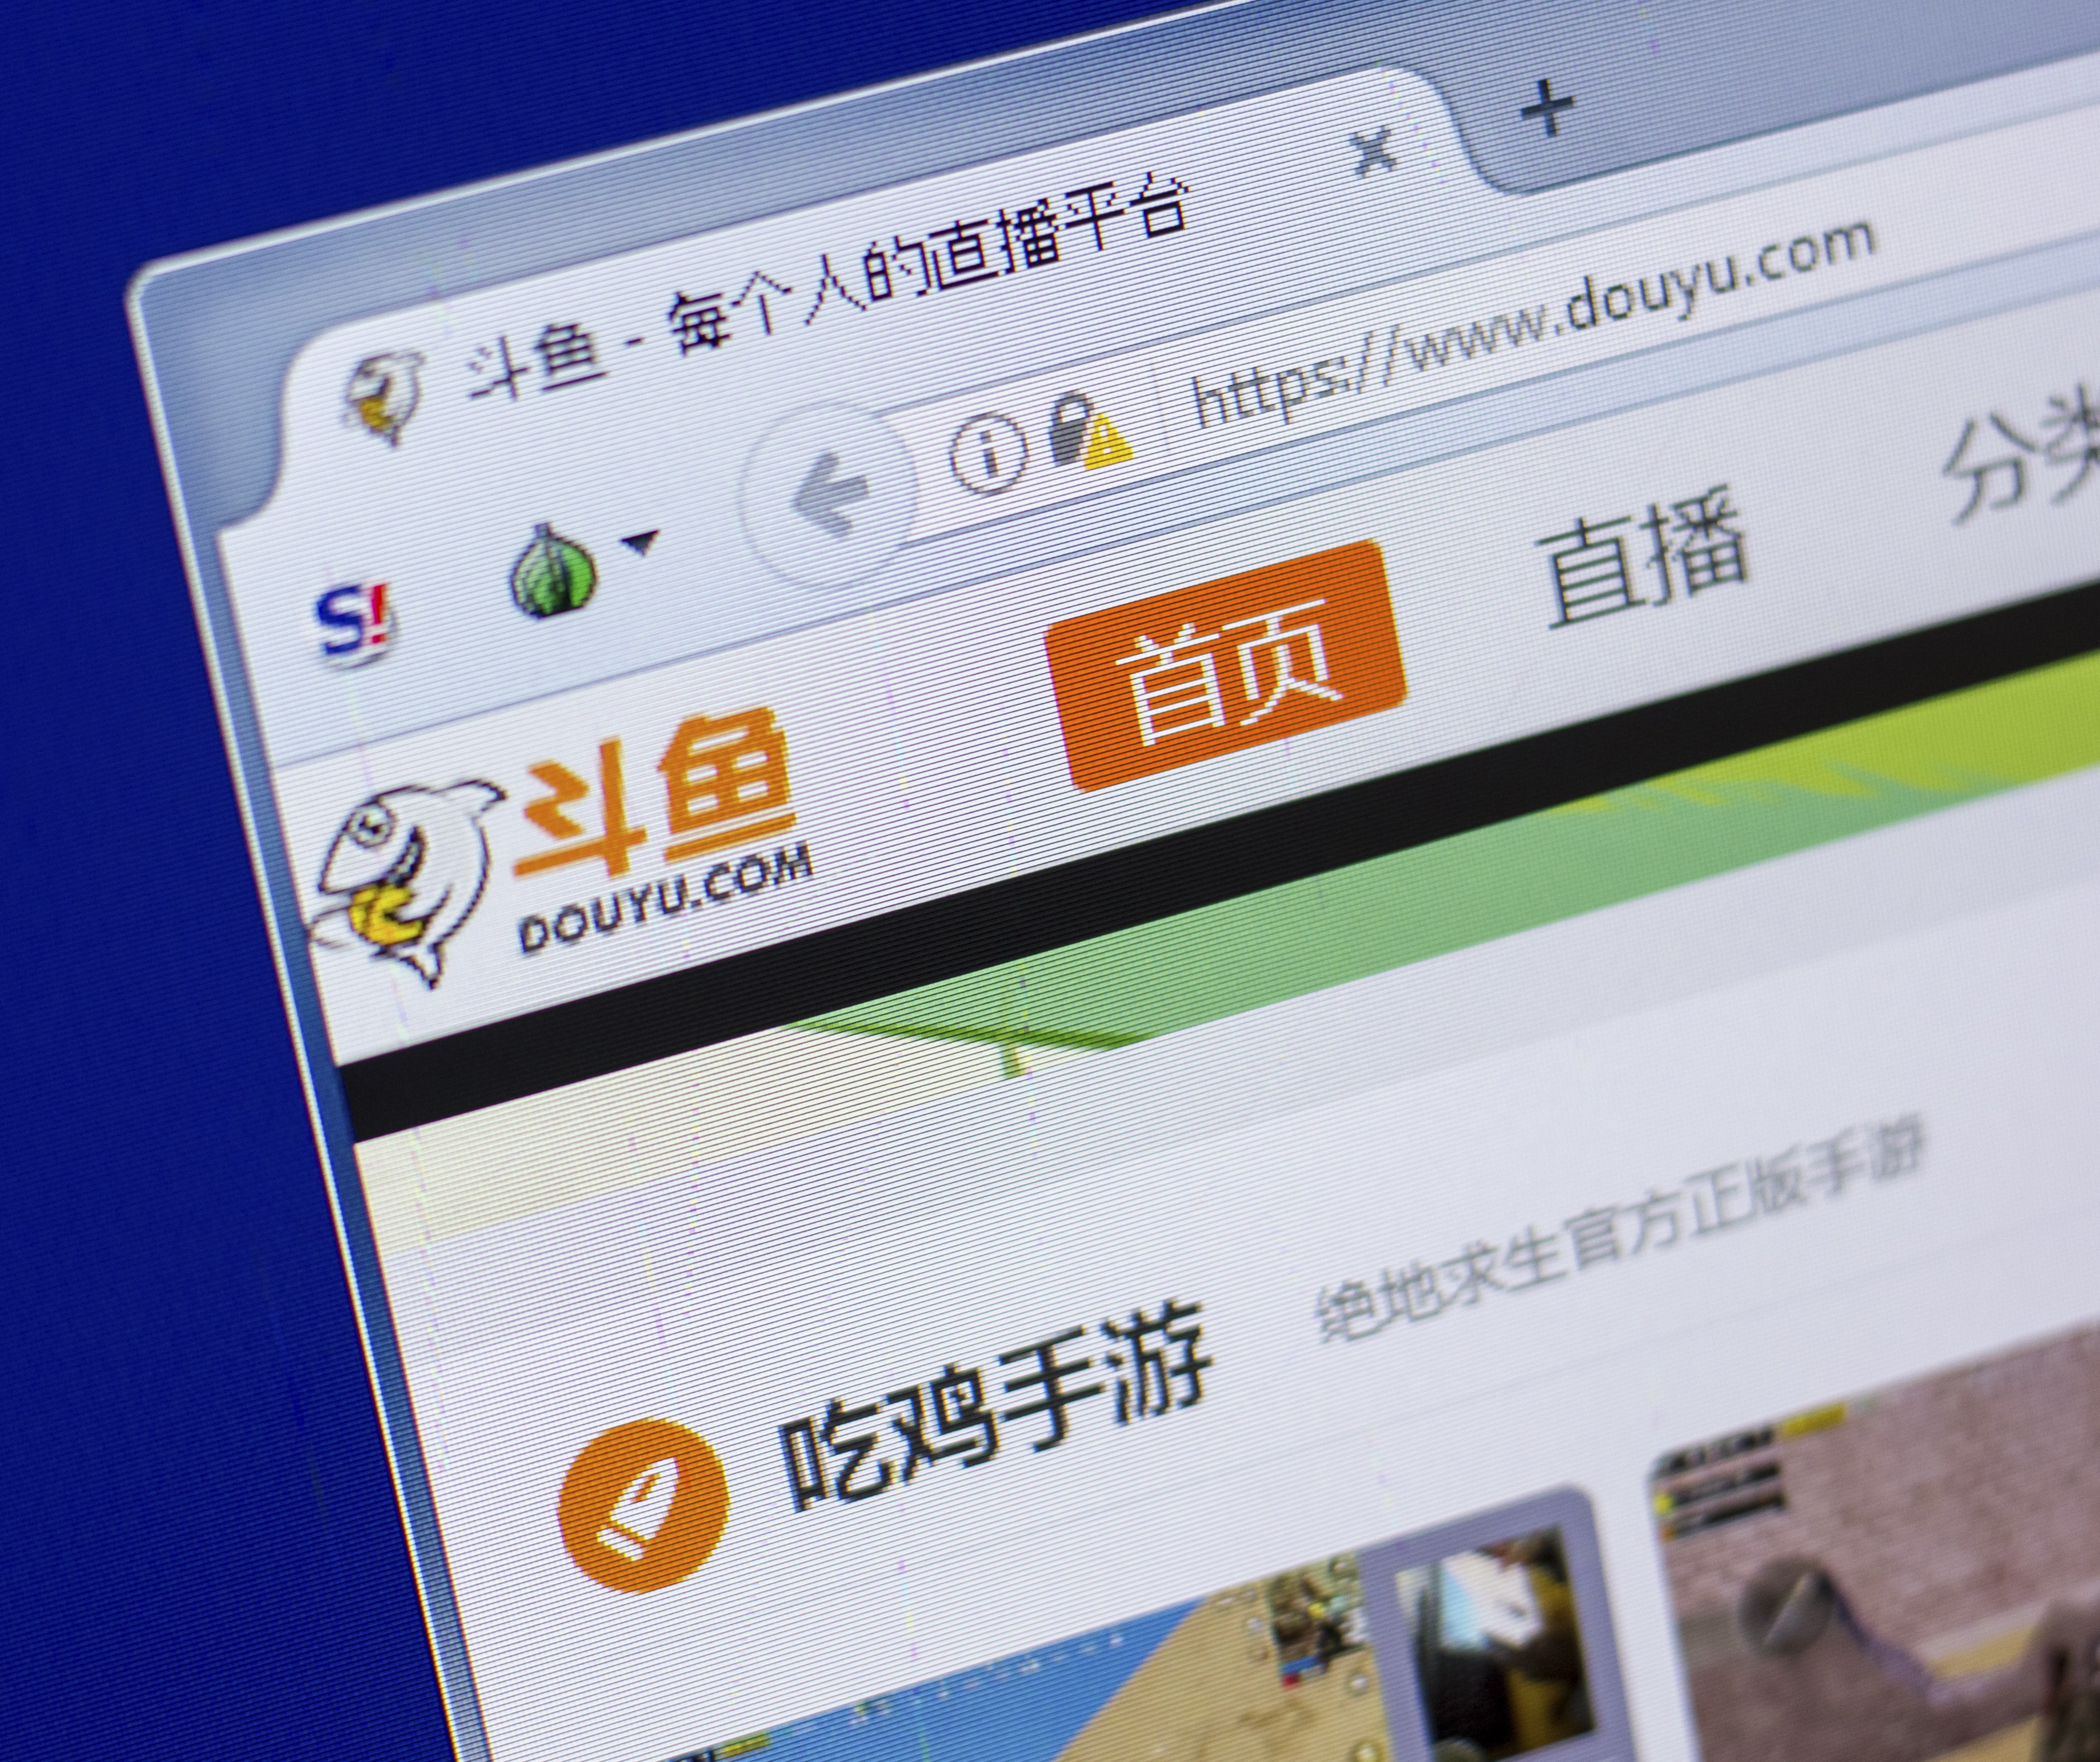 Douyu had nearly 160 million monthly active users across its platforms as of March. Photo: Shutterstock